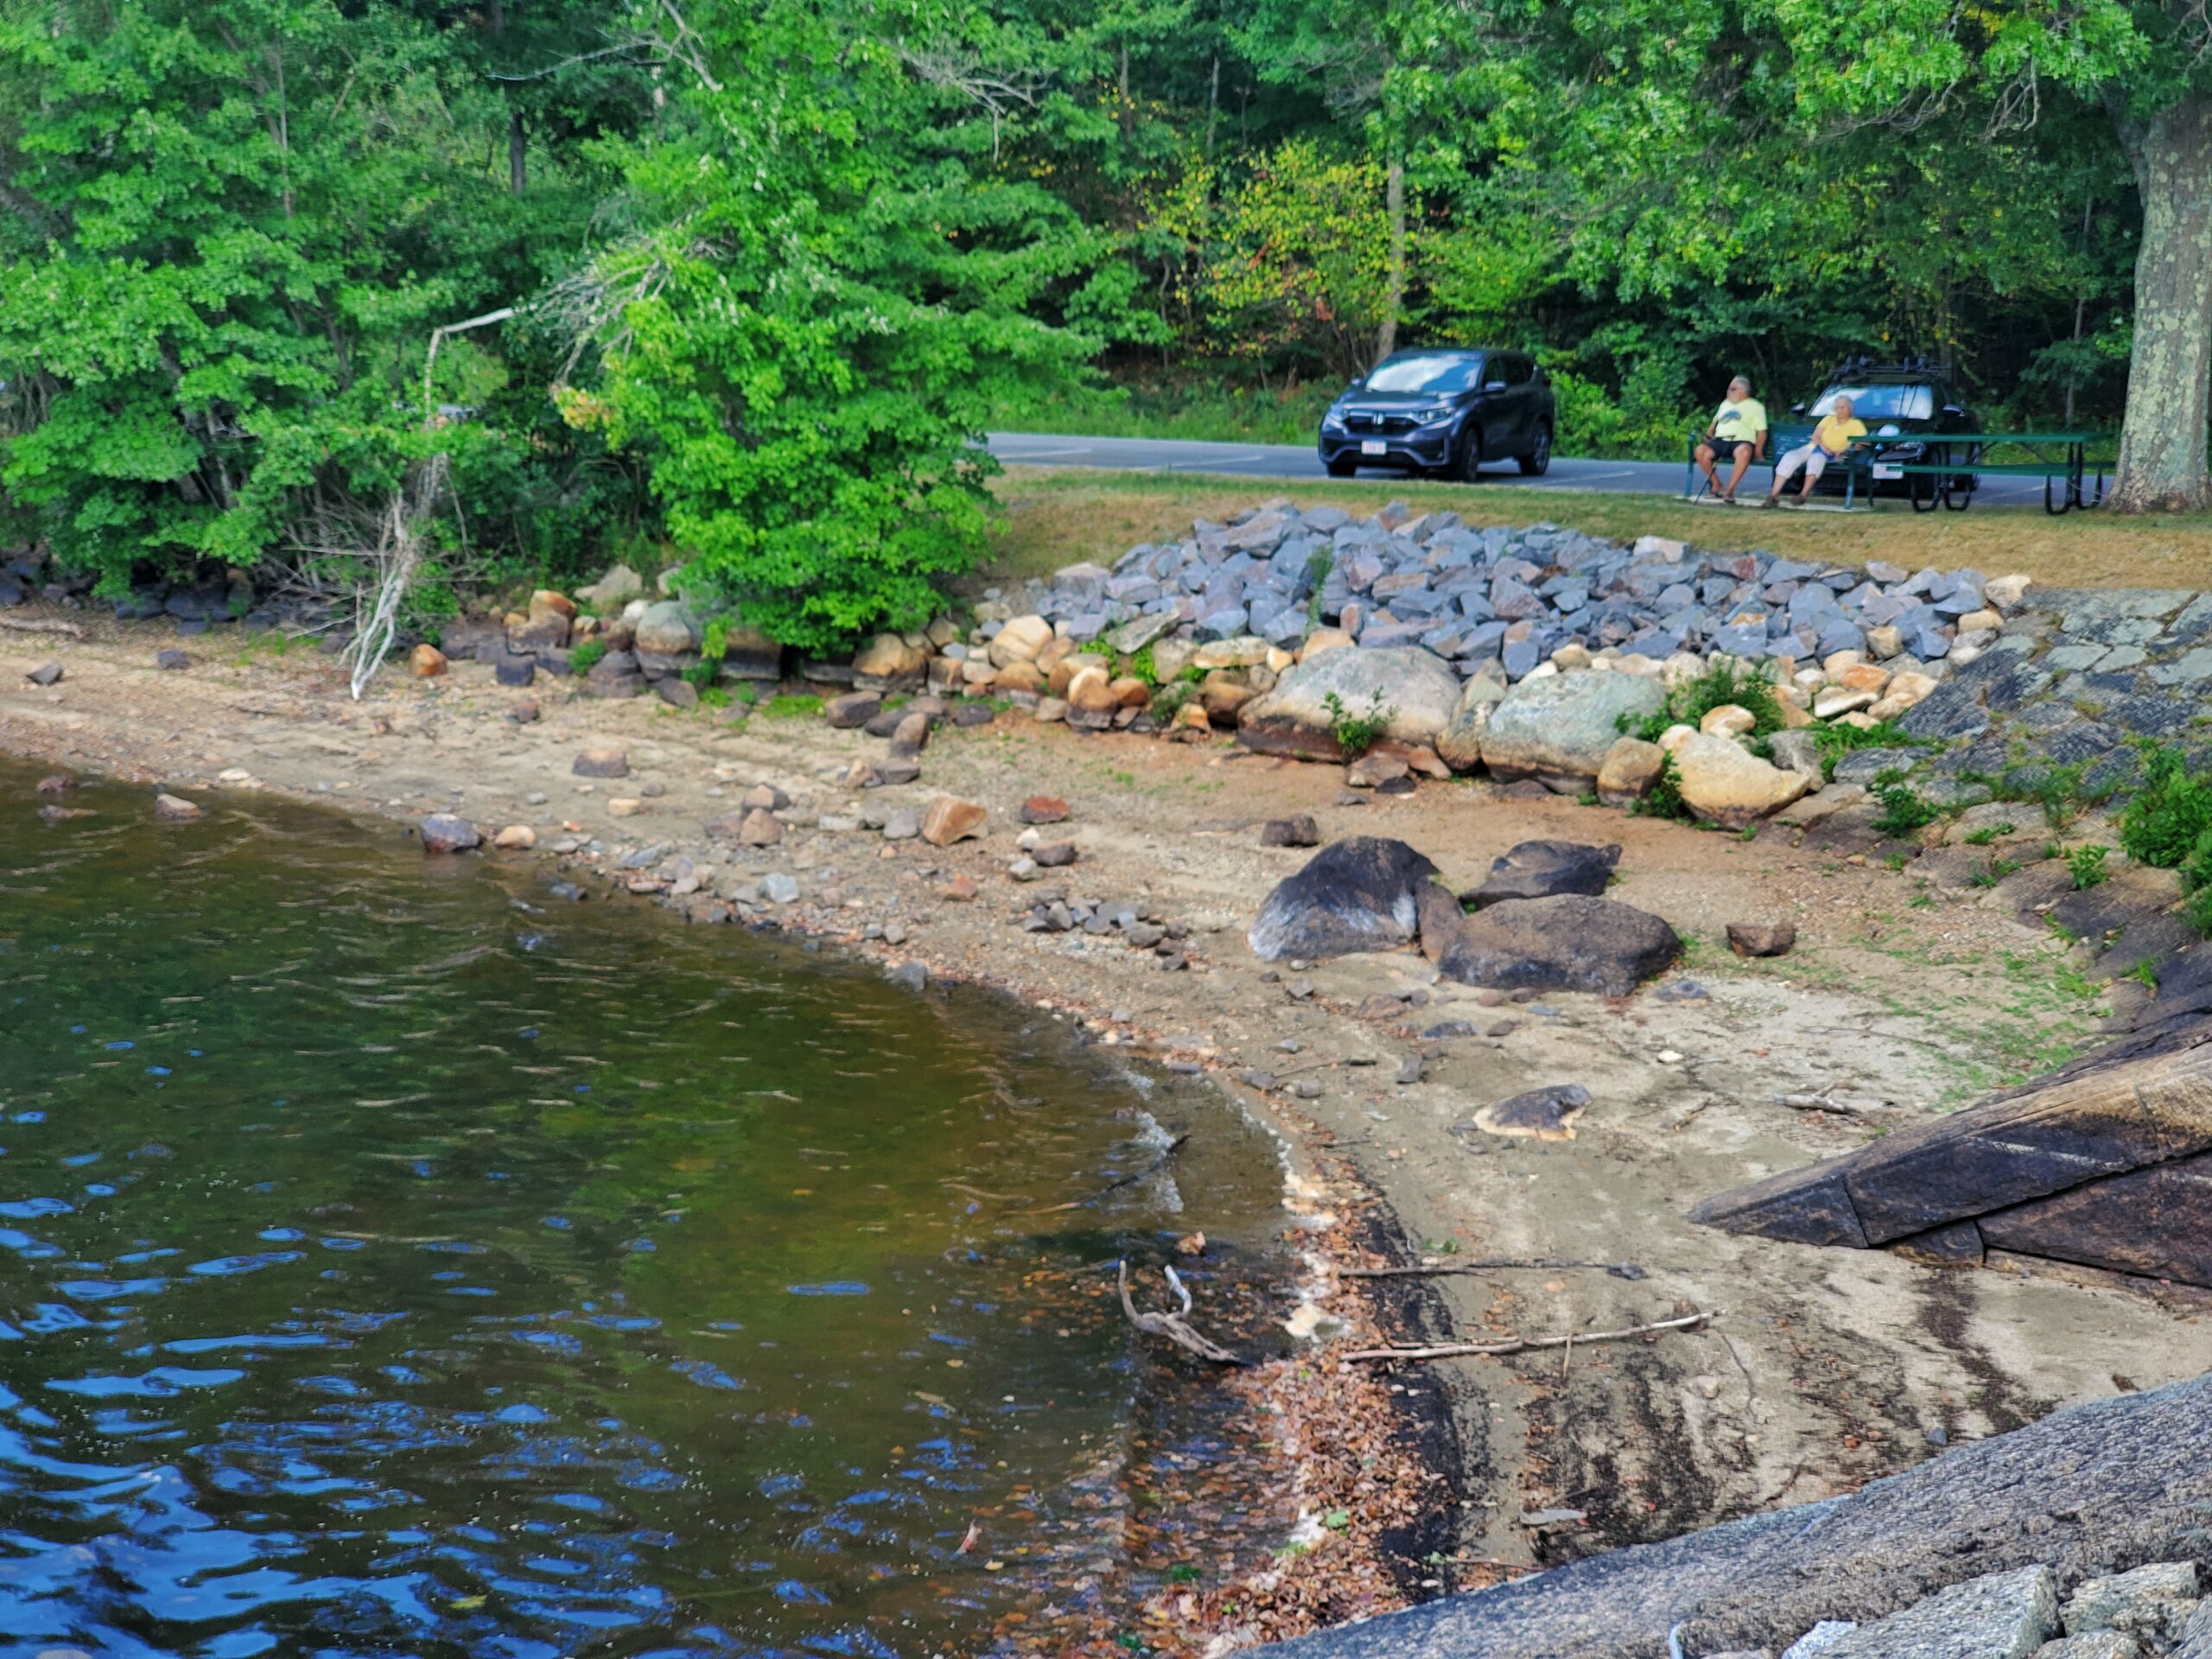 Health director: ‘No appreciable change’ in water quality at closed Hopkinton State Park beaches